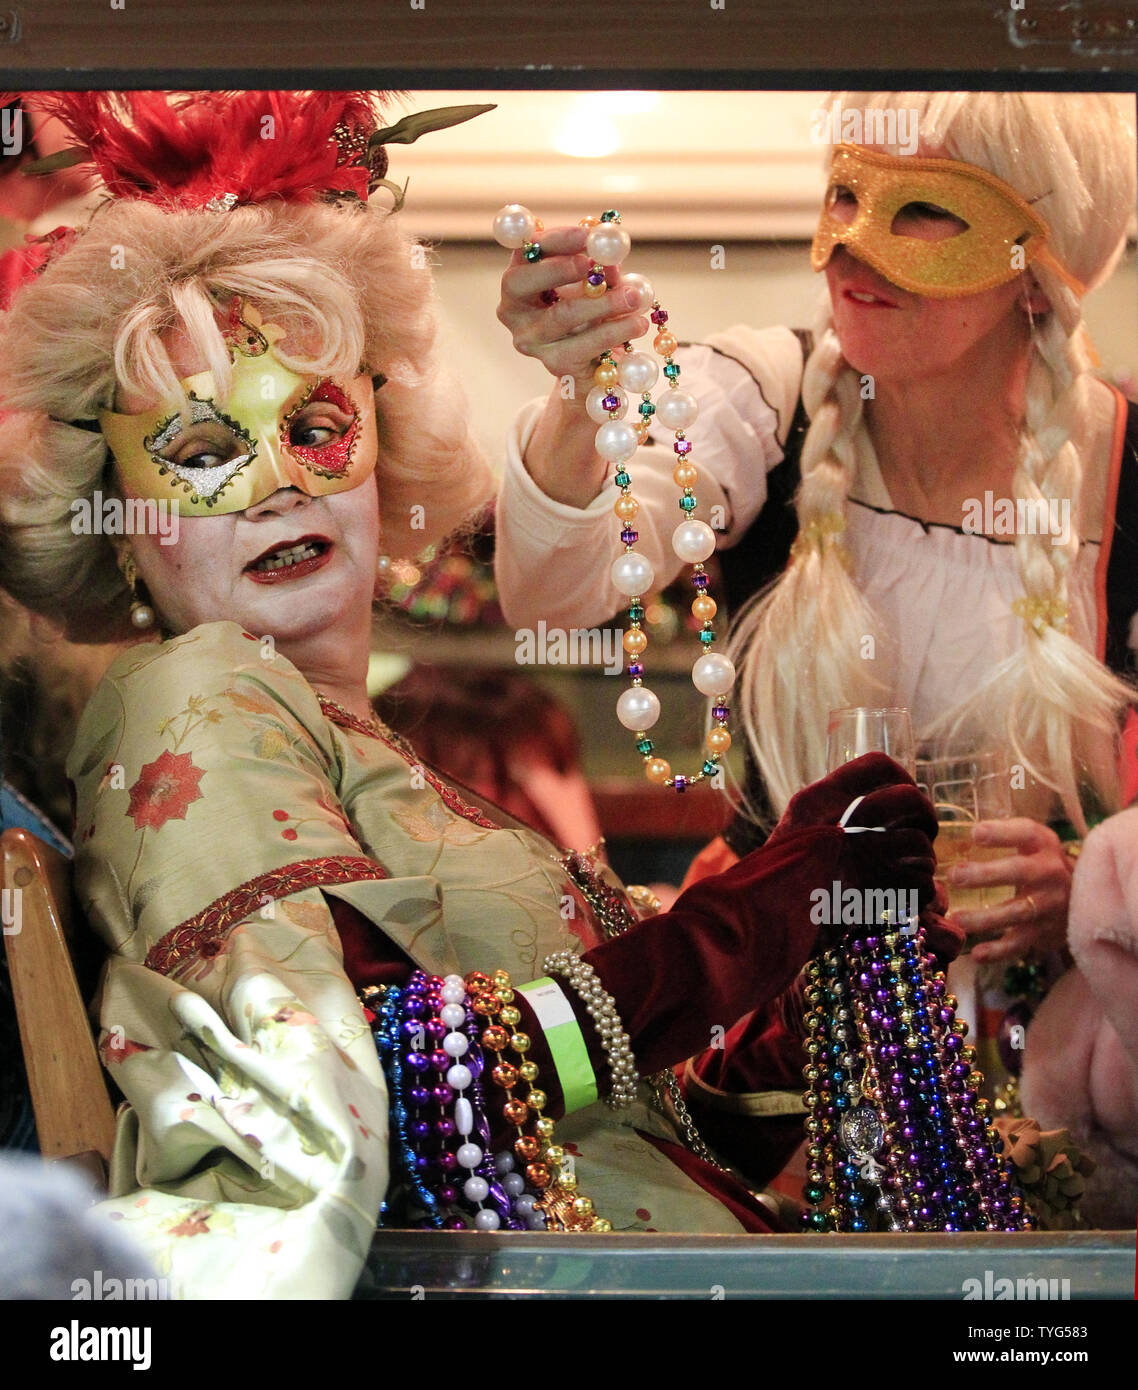 Members of the Phunny Phorty Phellows, 'The Heralds of Carnival,' celebrates the start of the 2016 Carnival season in New Orleans with a streetcar ride down St. Charles Avenue on Twelfth Night, January 6, 2016.The Mardi Gras organization is known for its satirical parade, and members' costumes often reflect topical themes.  Photo by AJ Sisco/UPI Stock Photo